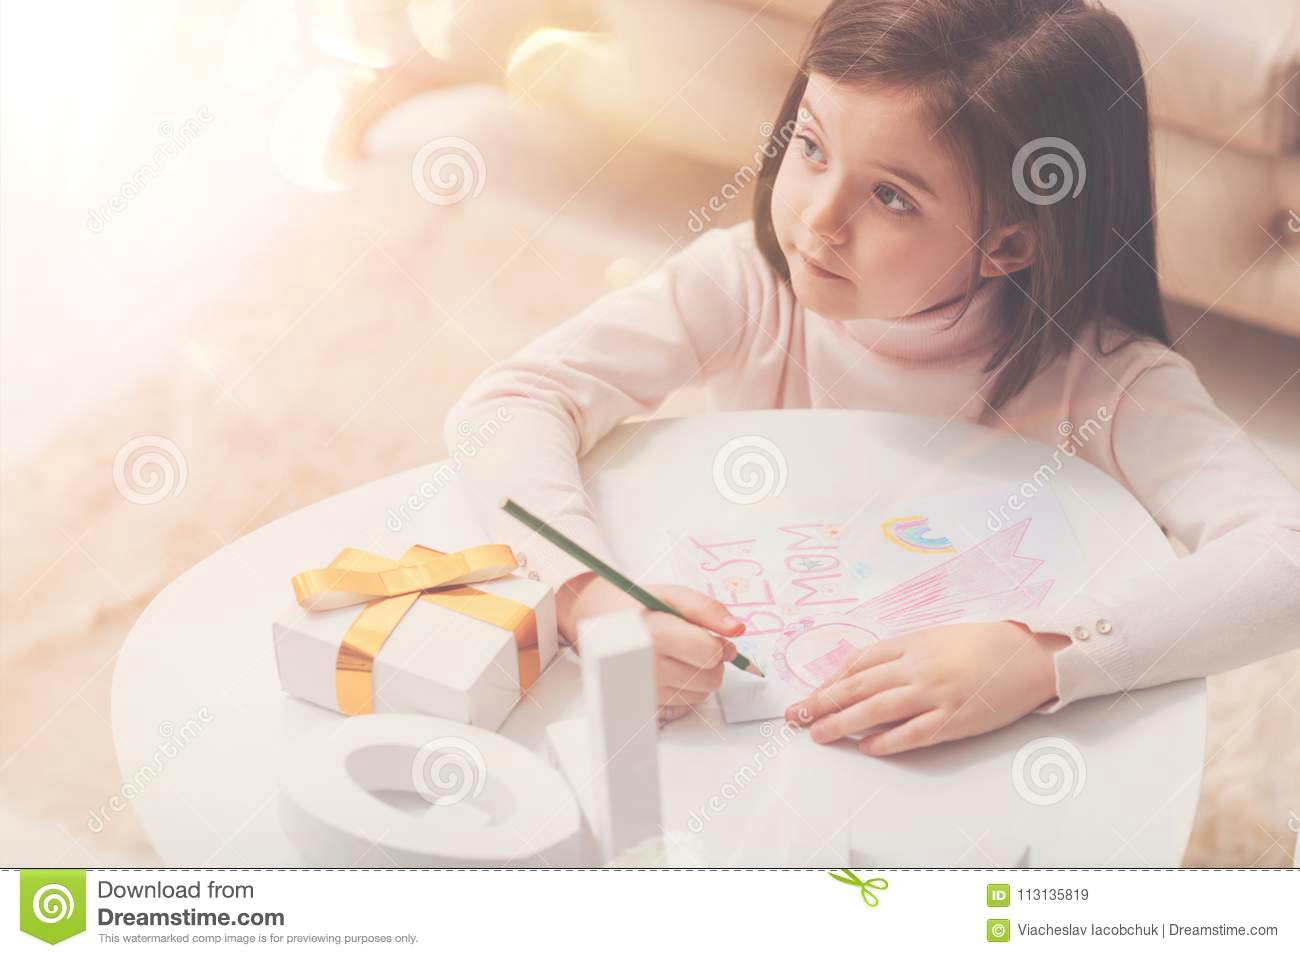 caring artistic girl making a picture for her mom